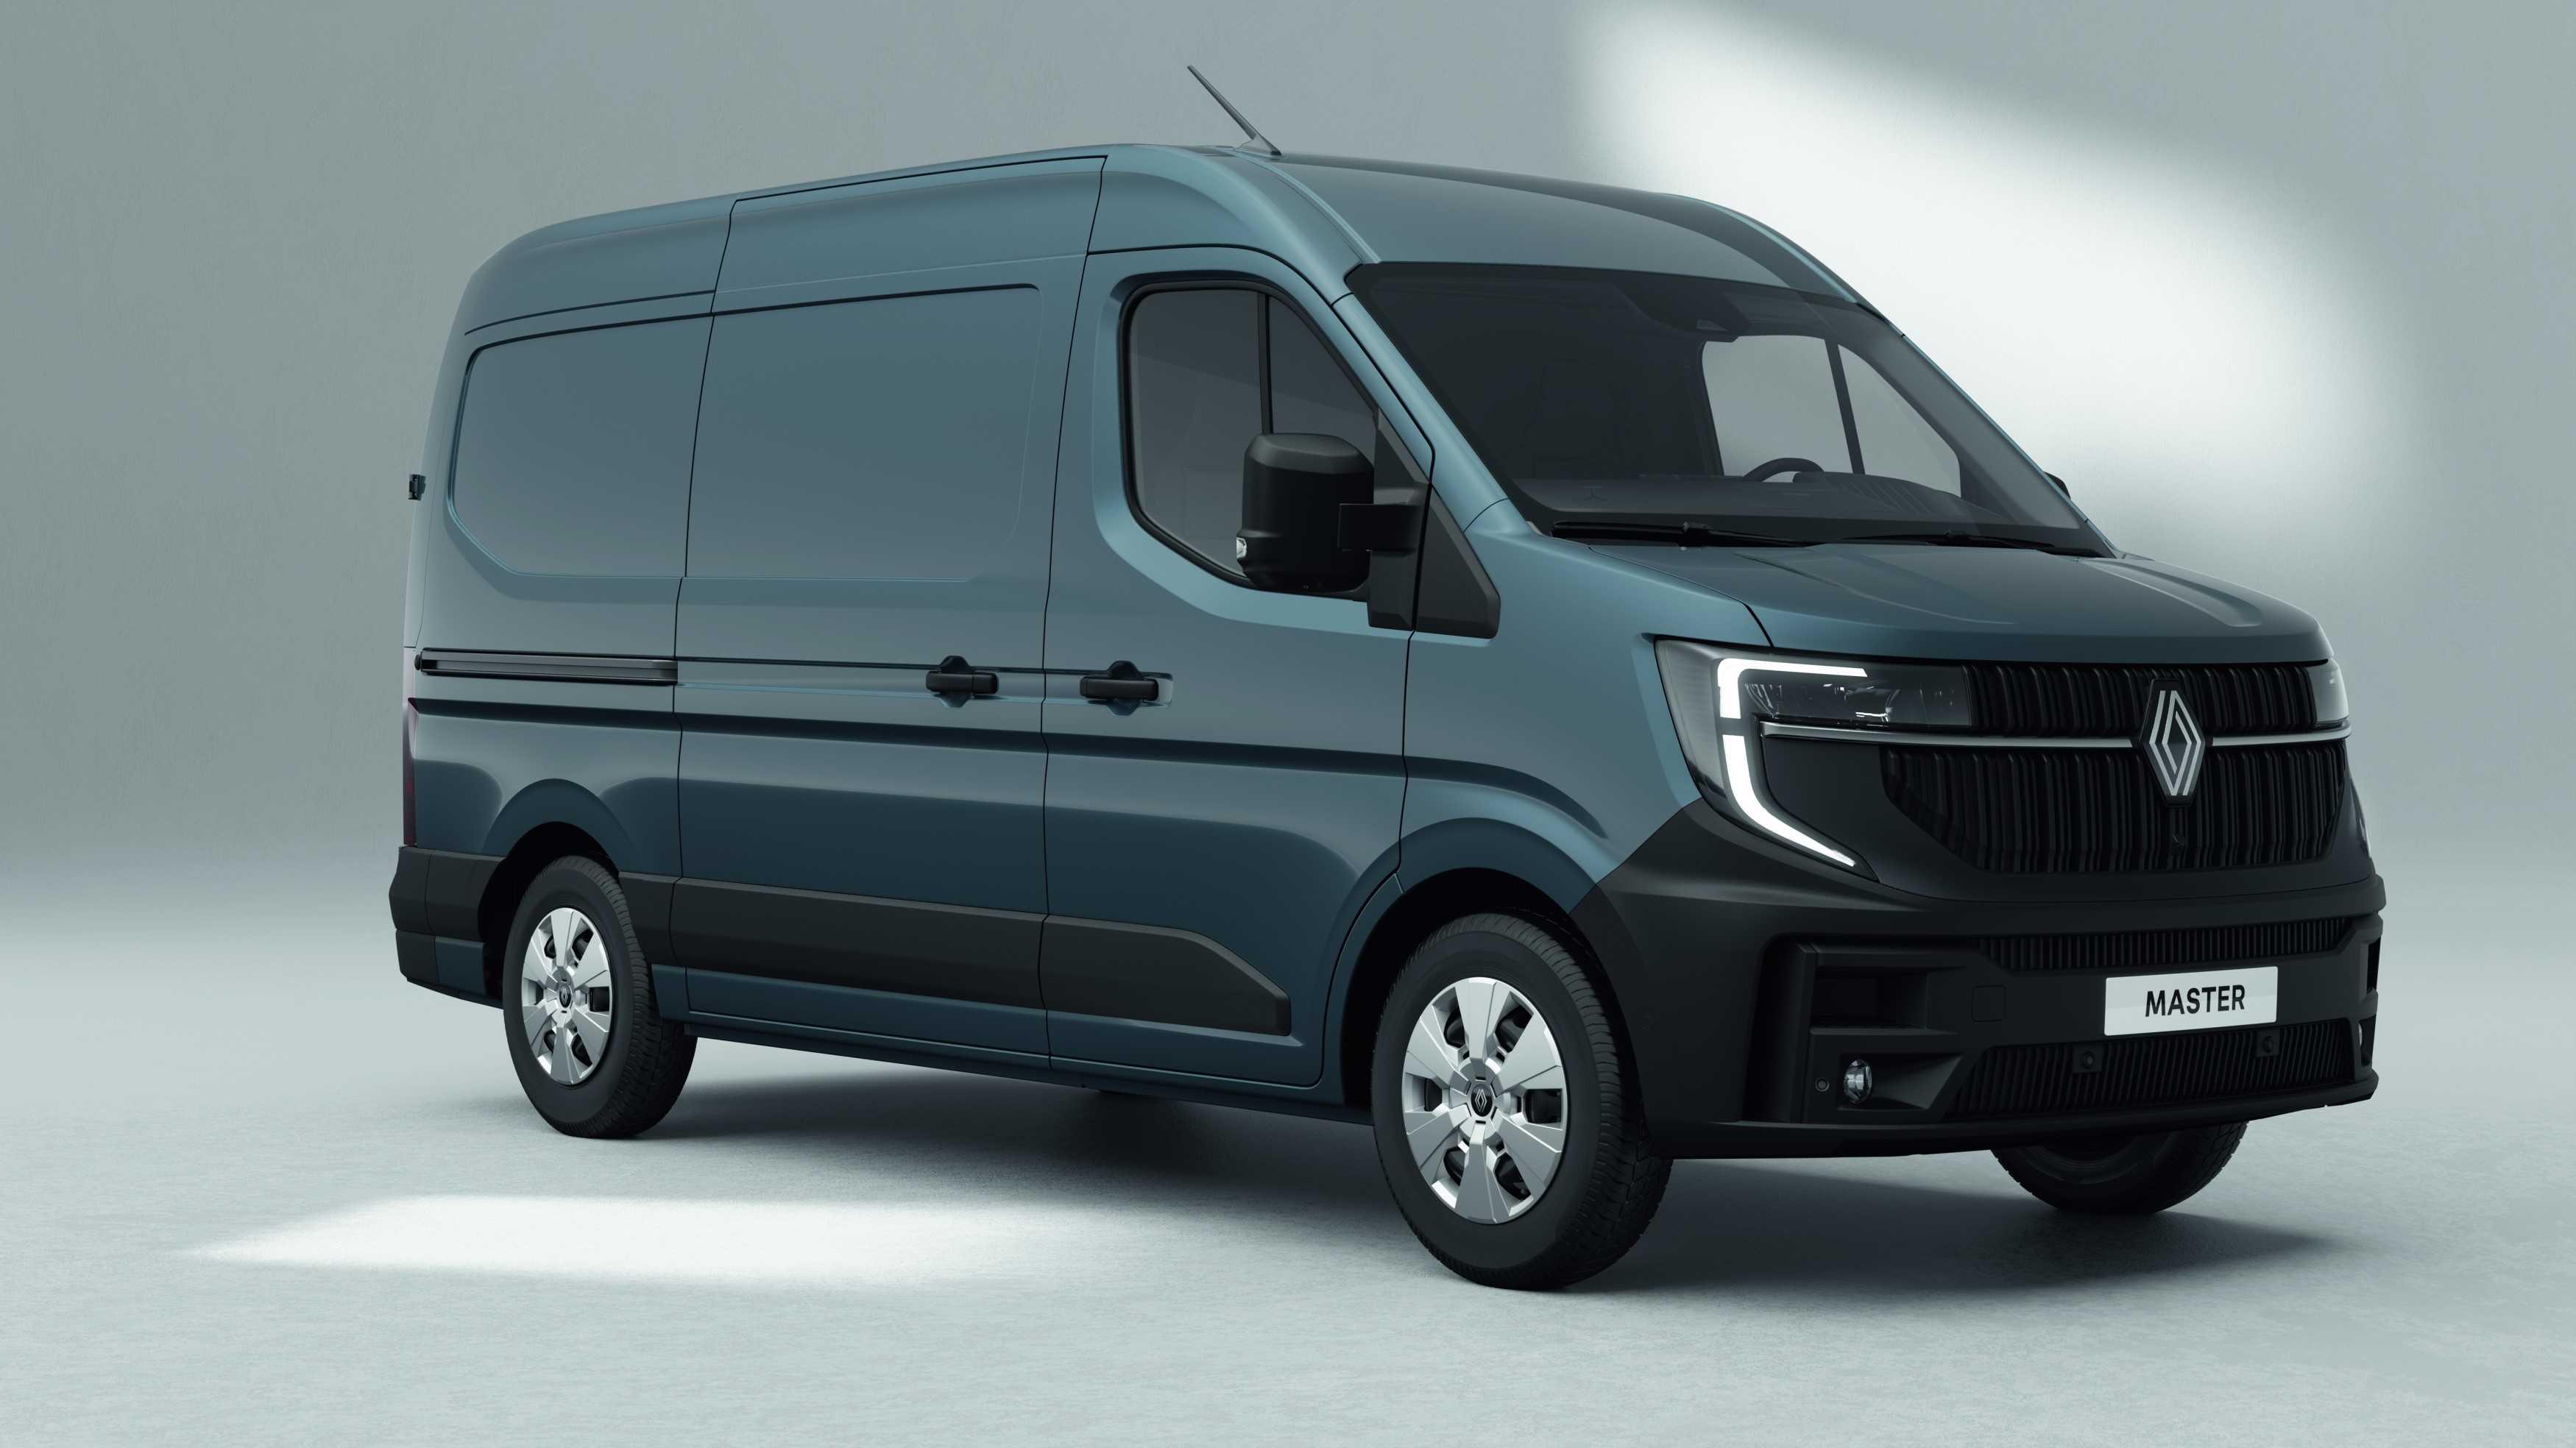 The All-new Renault Master: the next generation multi-energy Aerovan